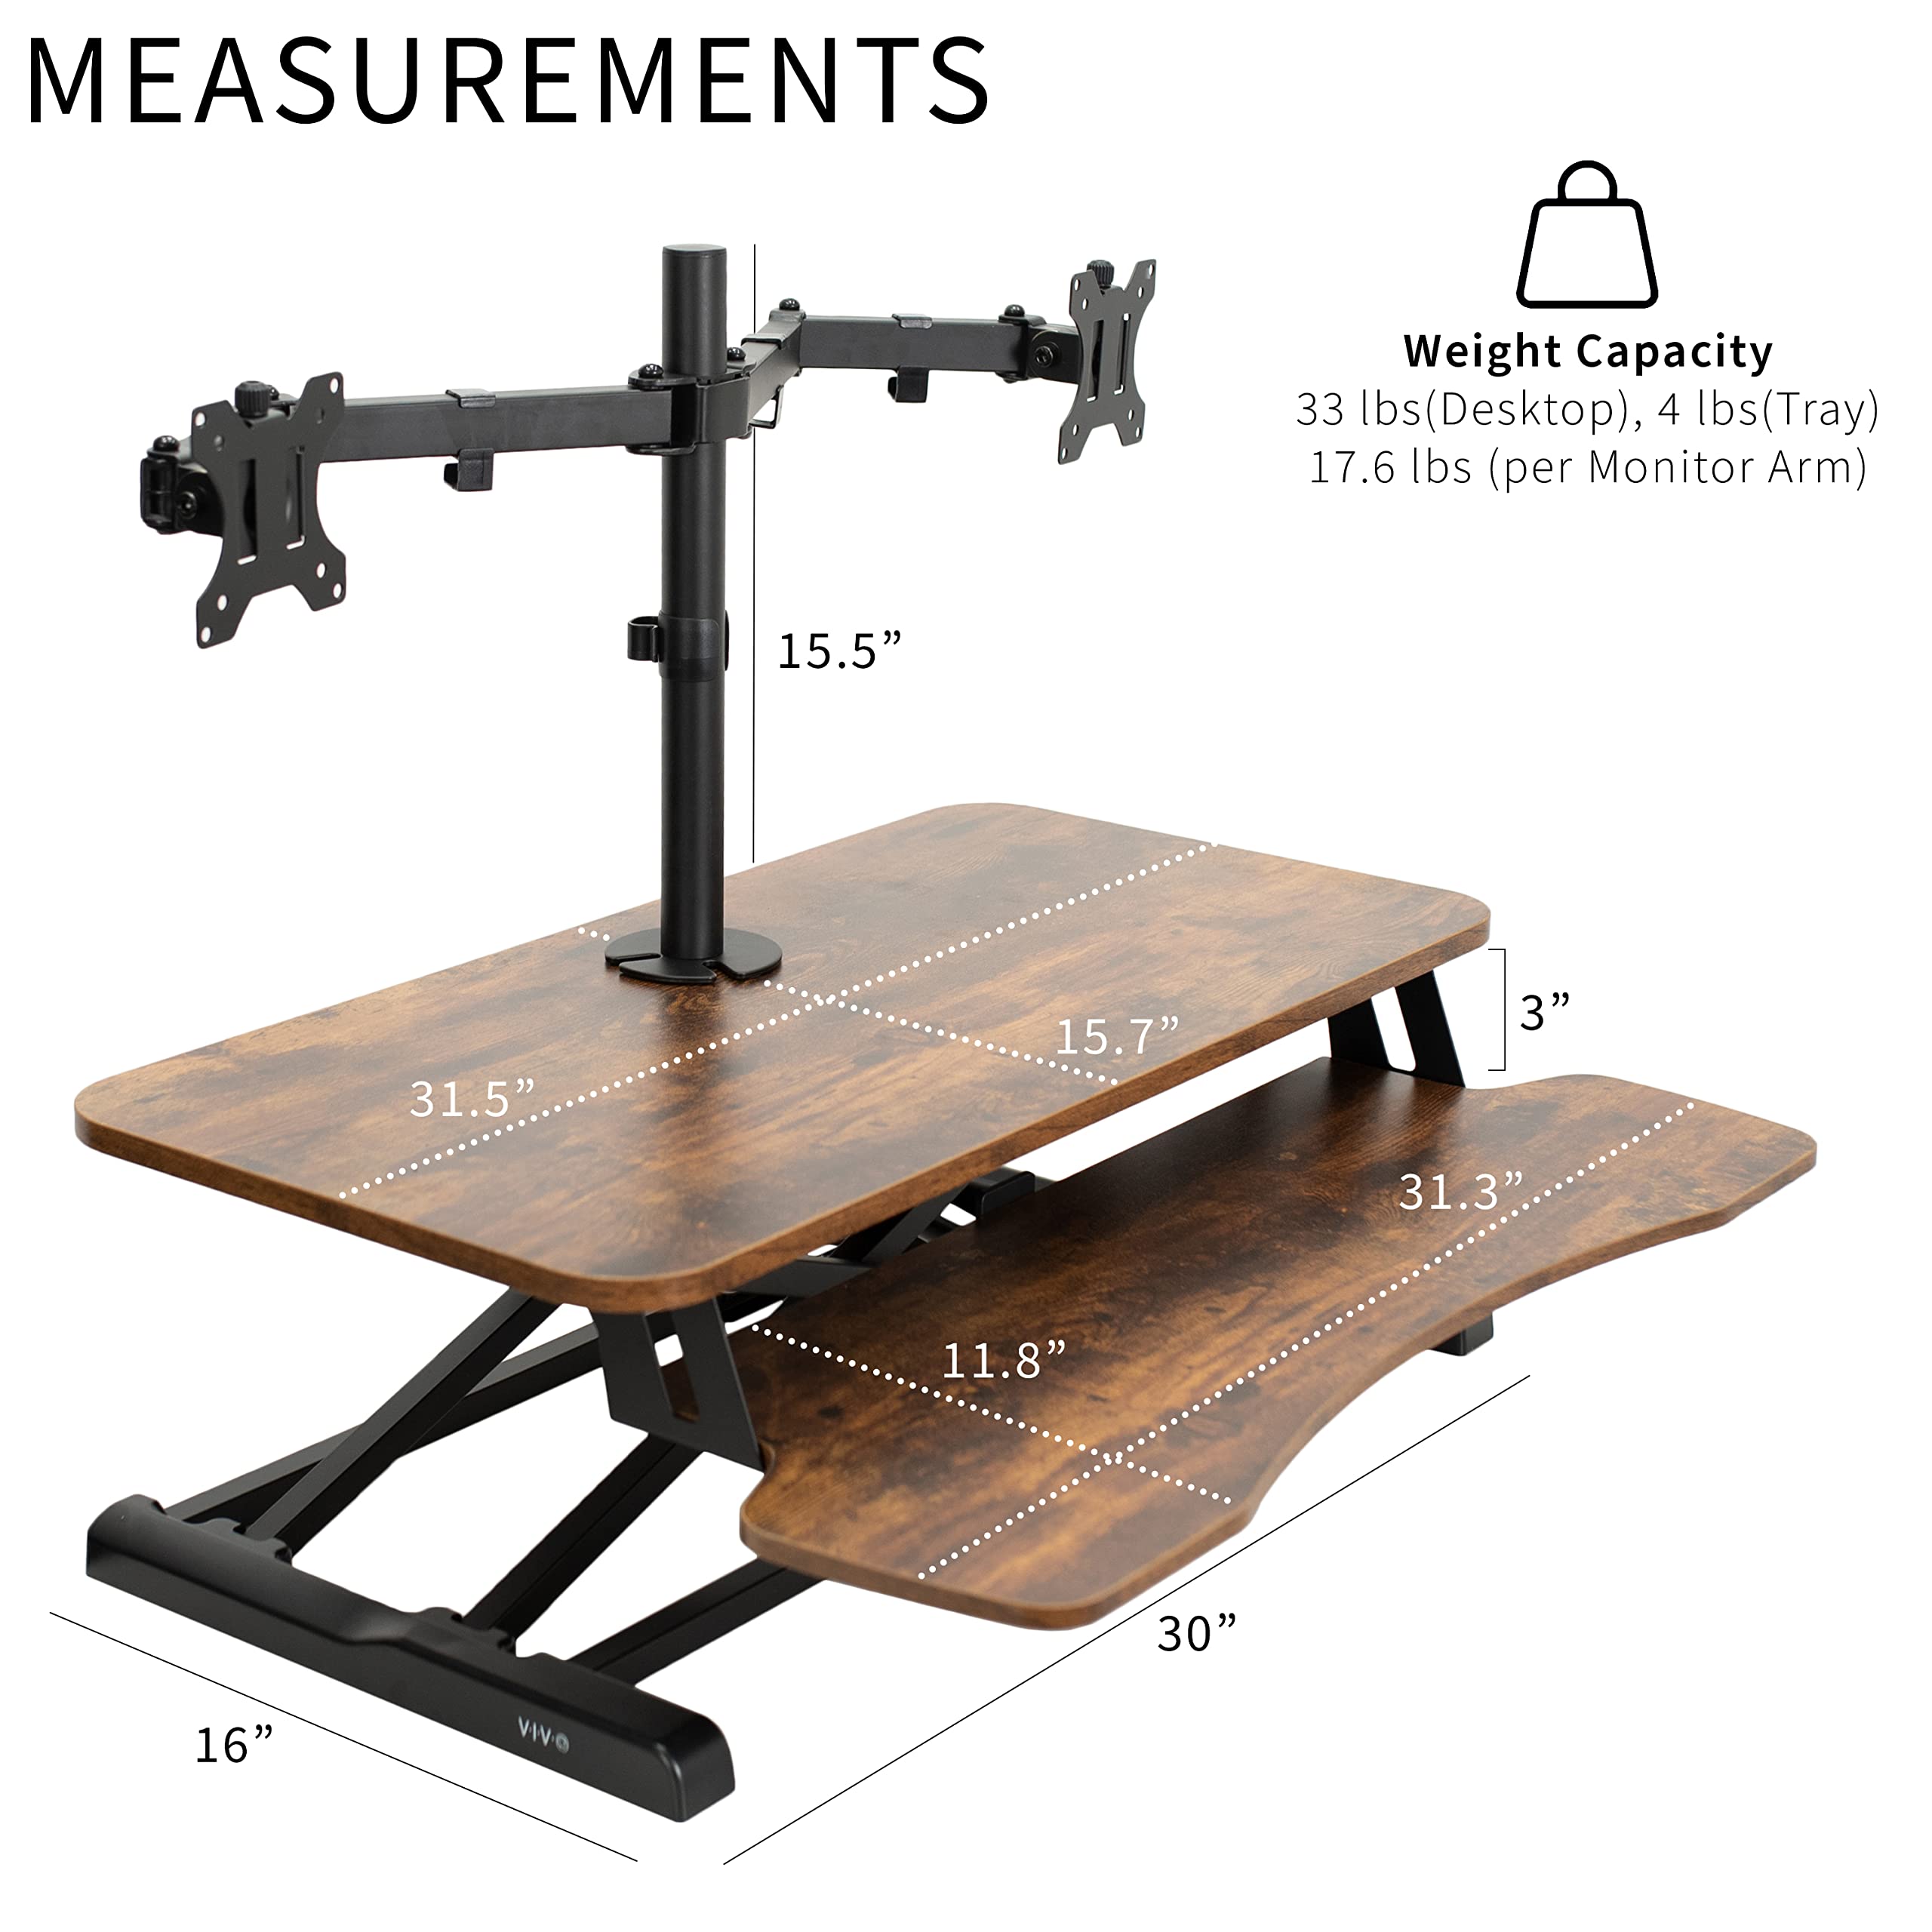 VIVO Height Adjustable 32 inch Standing Desk Converter with Dual 13 to 30 inch Monitor Stand, Sit Stand Monitor Mount and Desk Riser, Vintage Brown Top, Black Frame, DESK-V000KN-M2